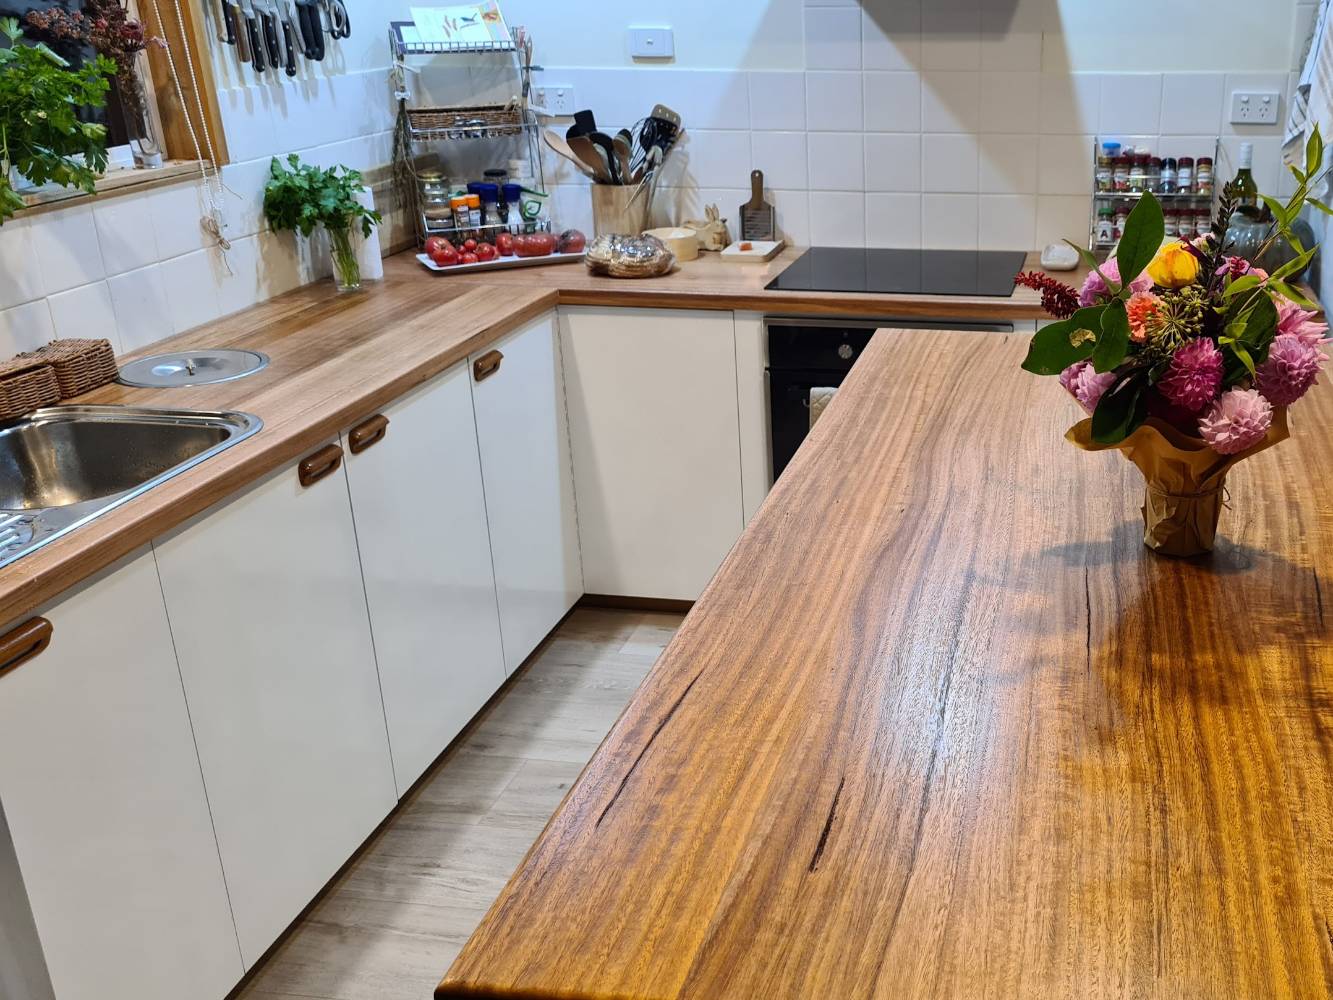 A new kitchen with island bench and Tas oak benchtops